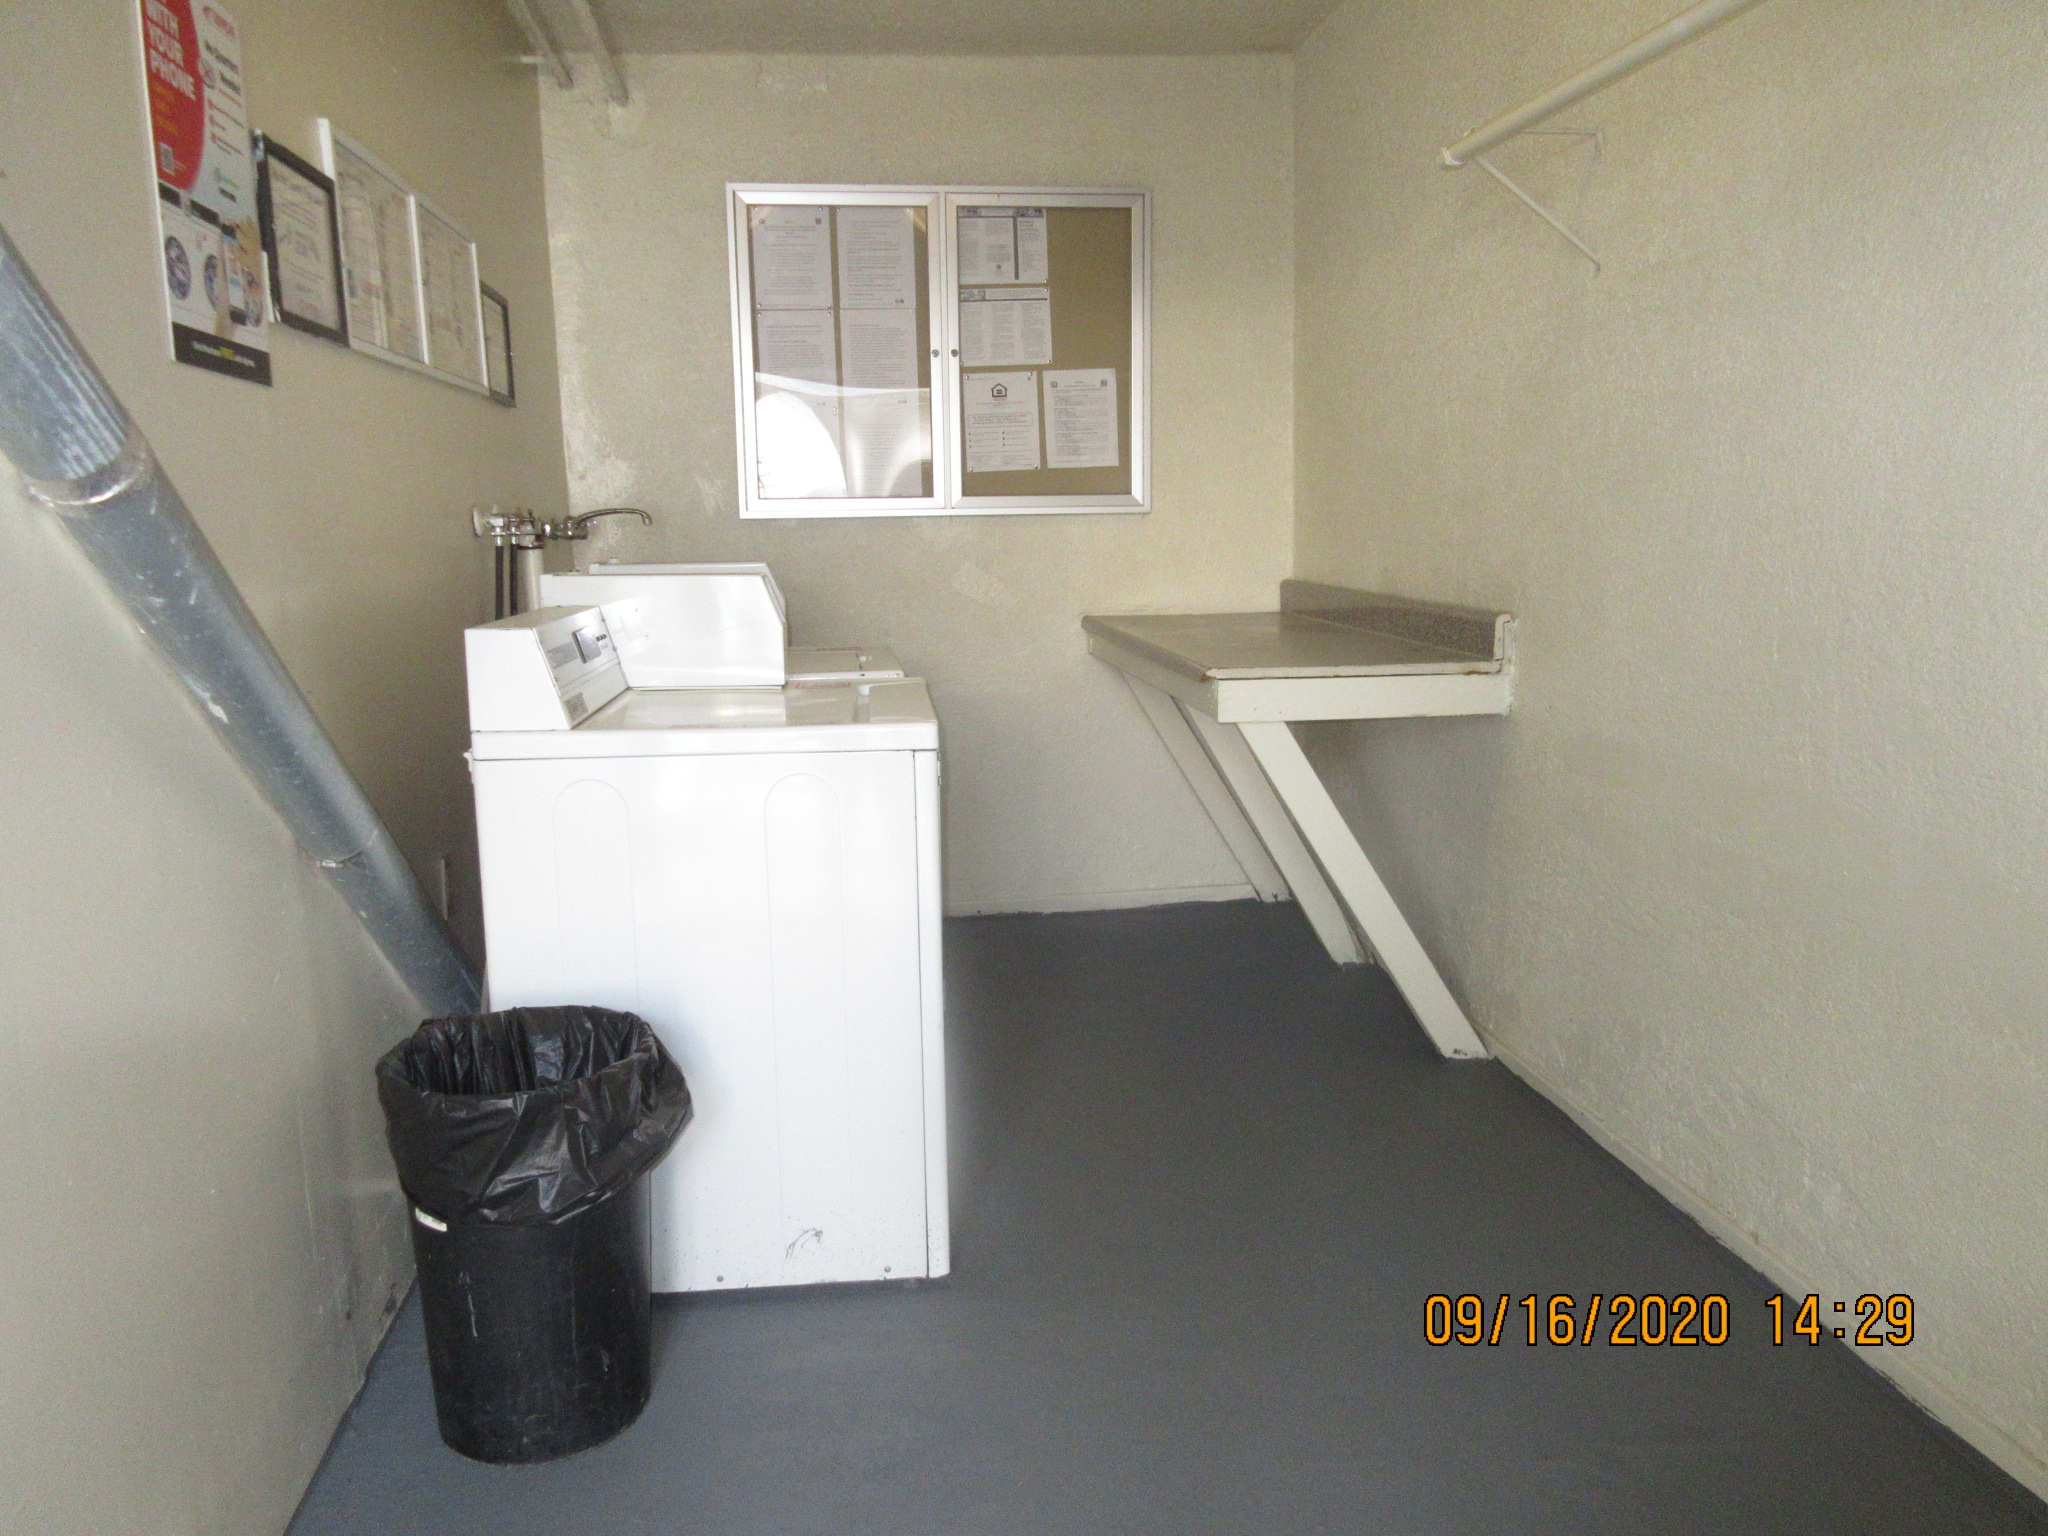 Image of the apartment laundry room